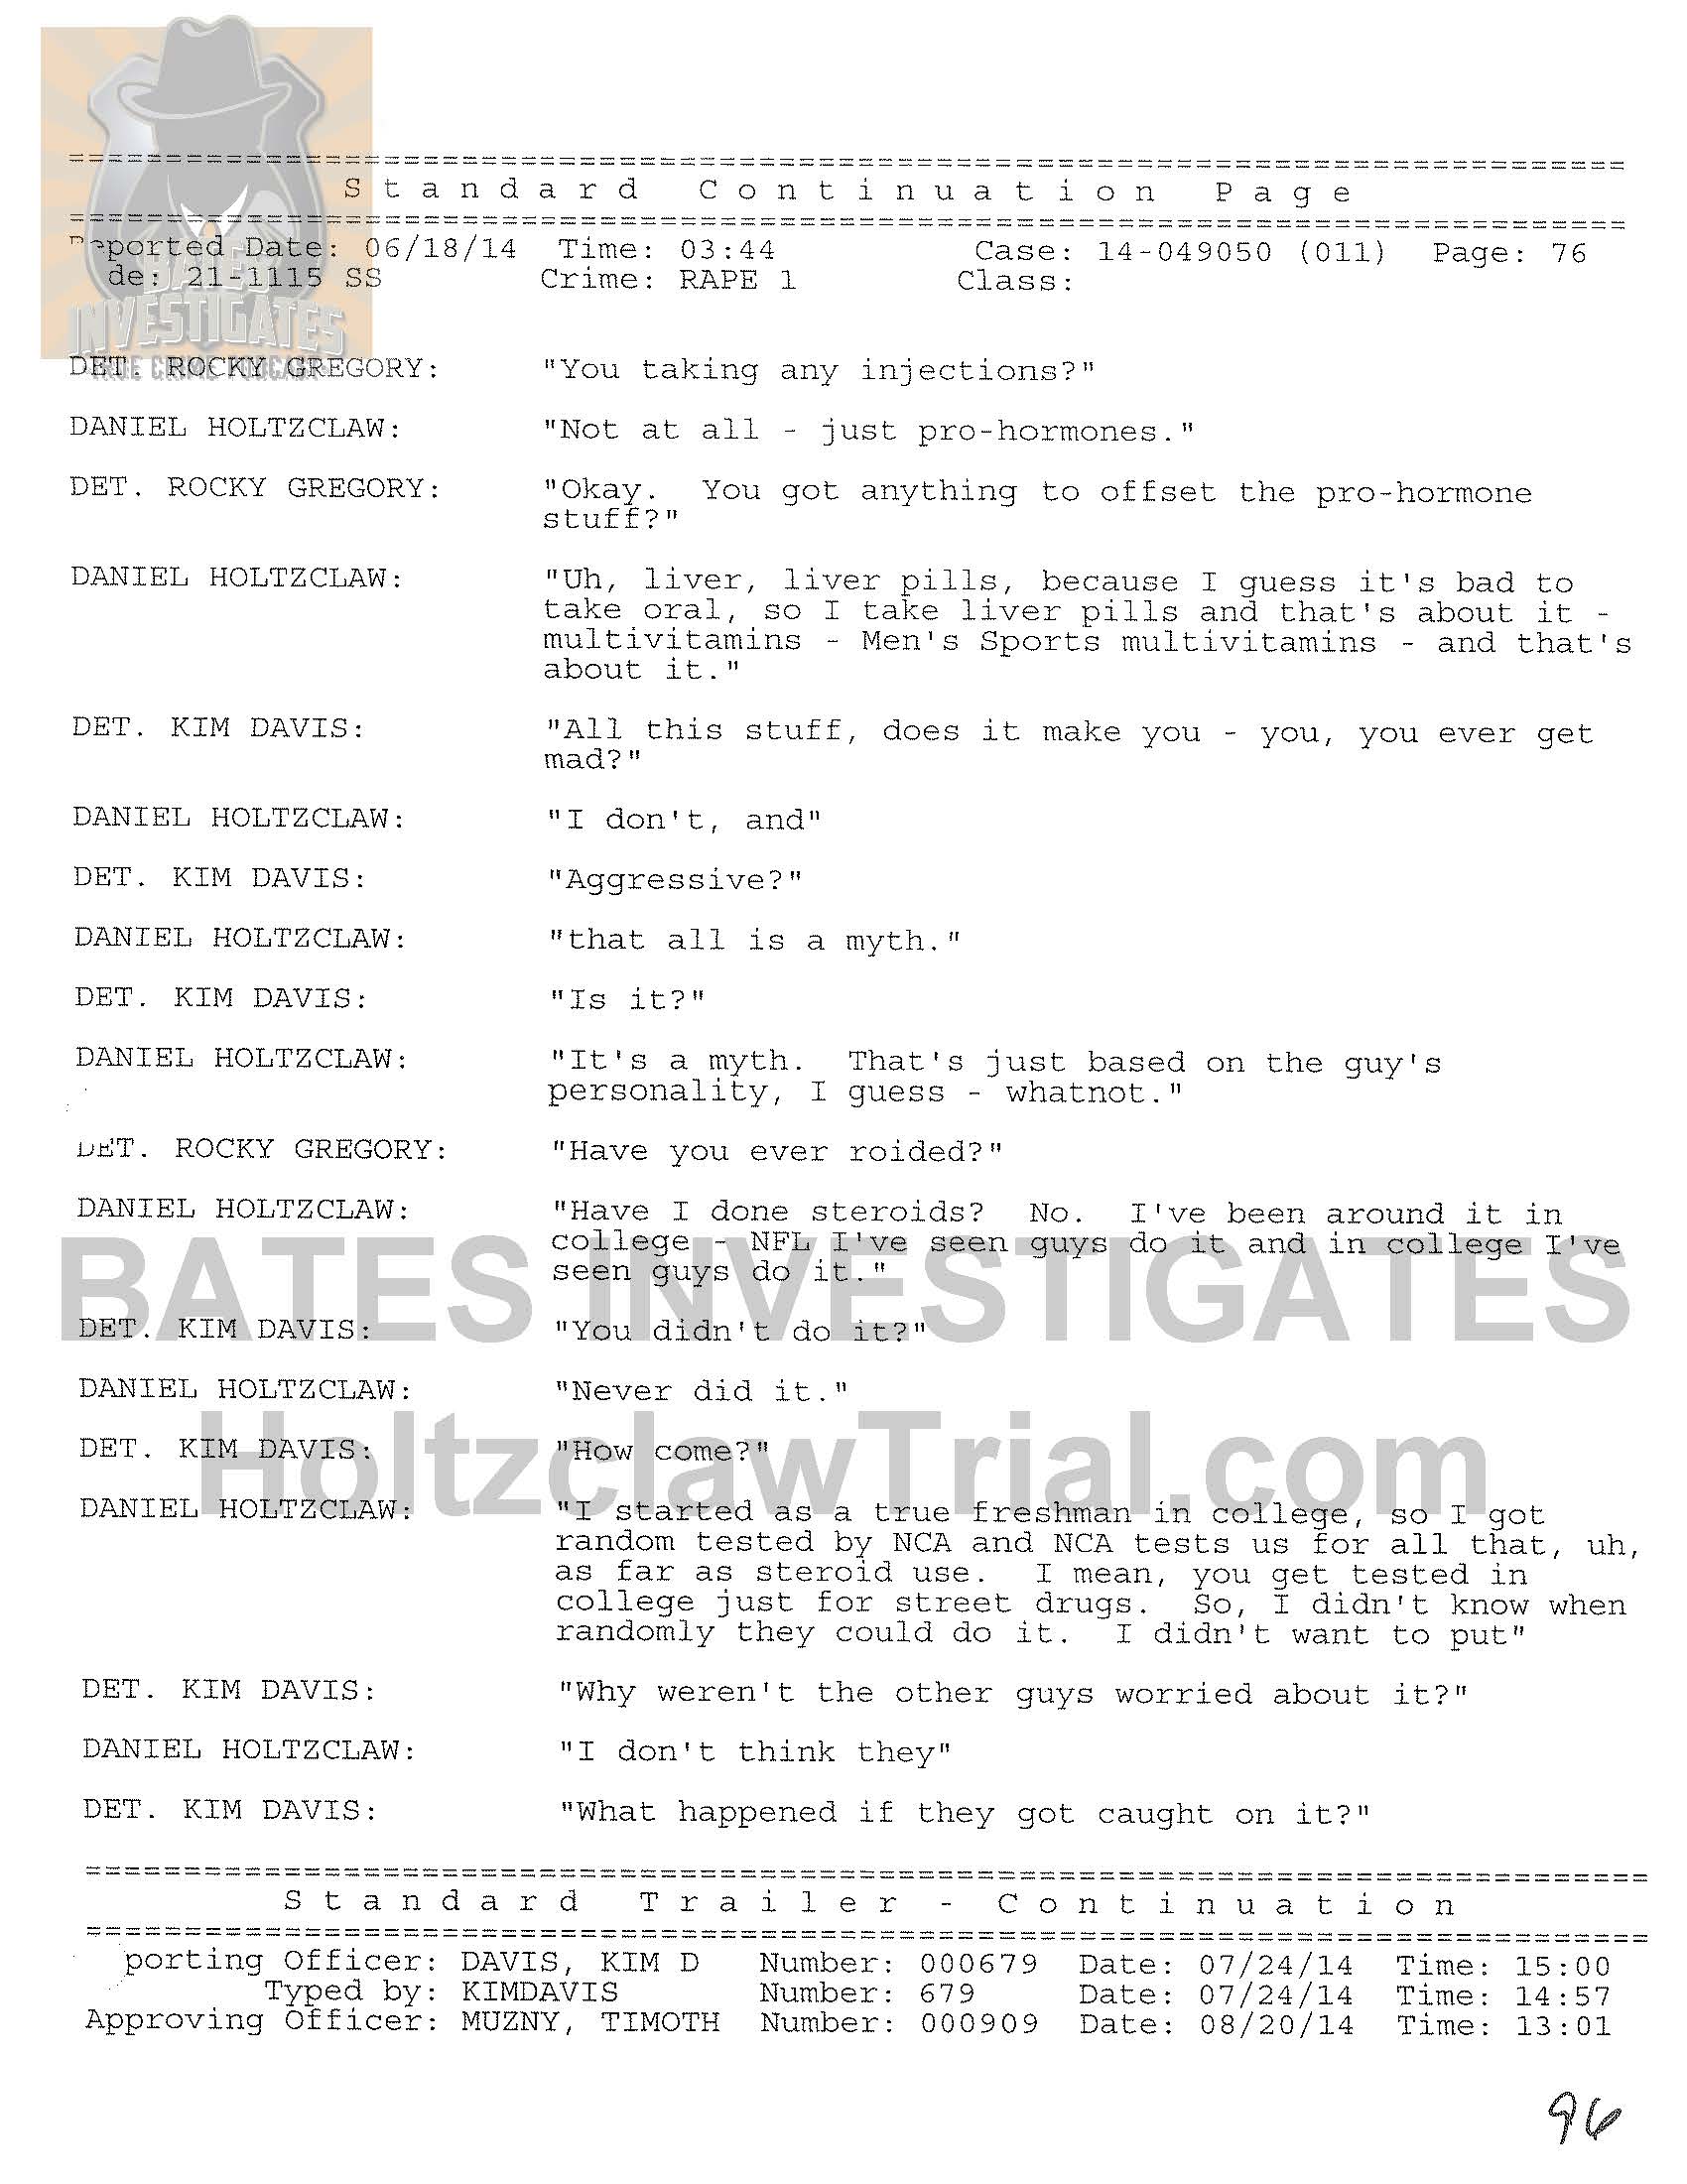 Holtzclaw Interrogation Transcript - Ep02 Redacted_Page_76.jpg